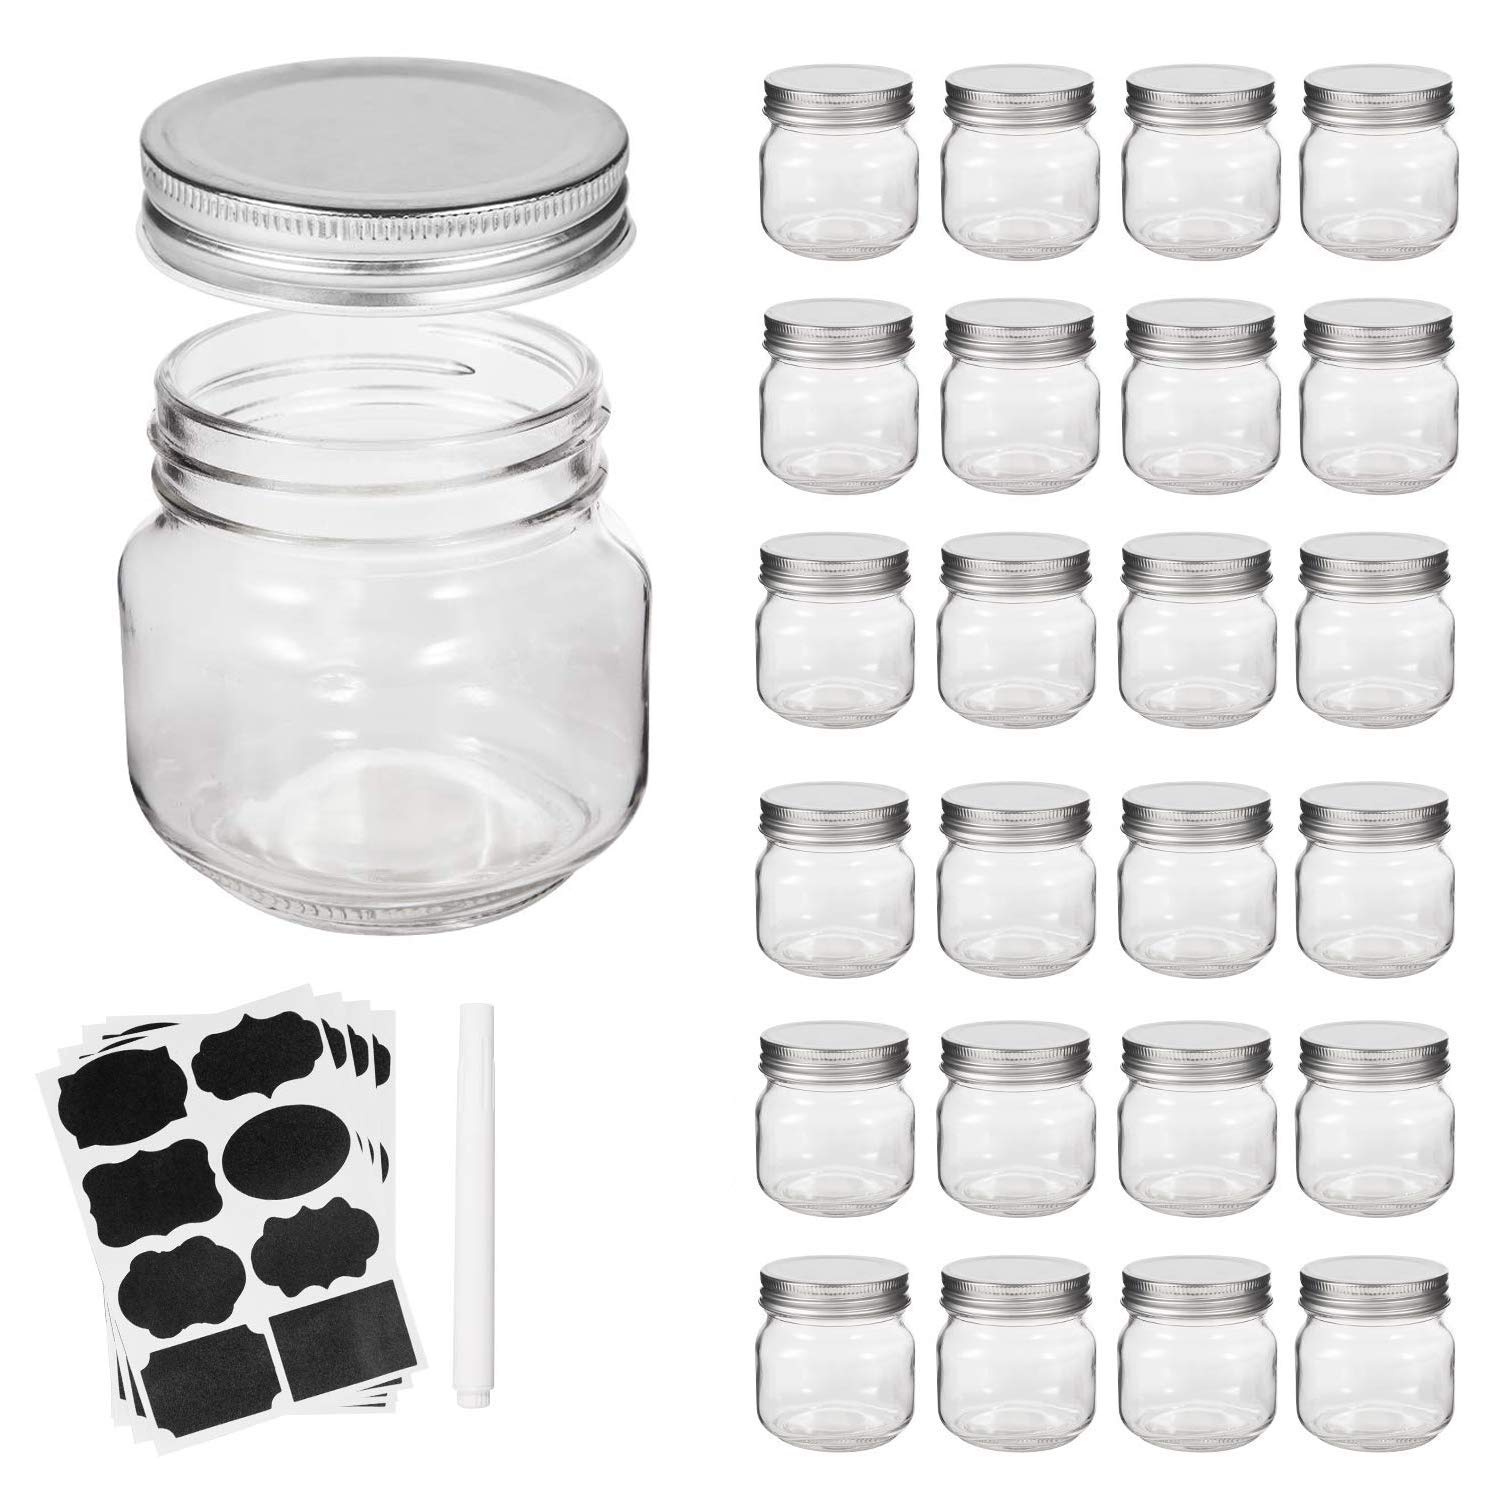 Accguan Mason Jars, Accguan glass jar 8OZ With Regular Lids and Bands(Silver), Ideal for Jam,Honey,Wedding Favors,Shower Favors, 24 PAcK